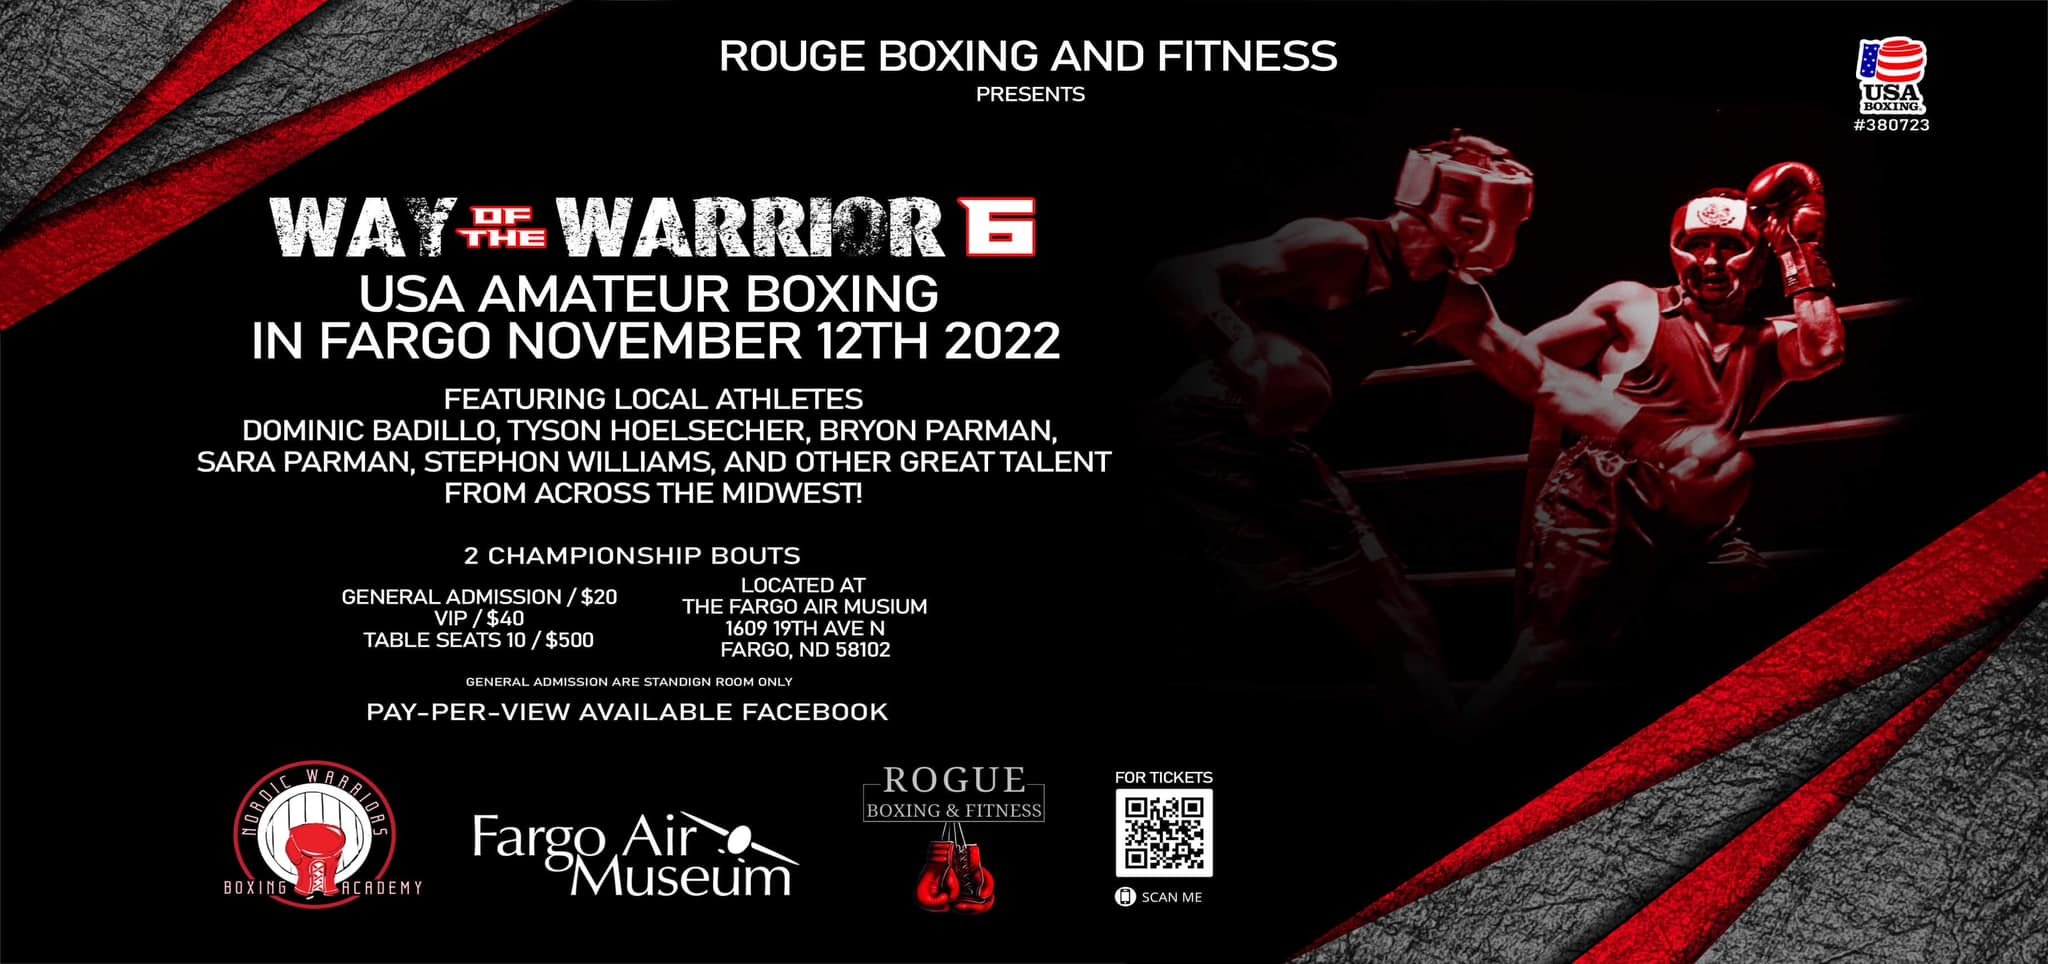 Fargos Upcoming Boxing and Fitness Events